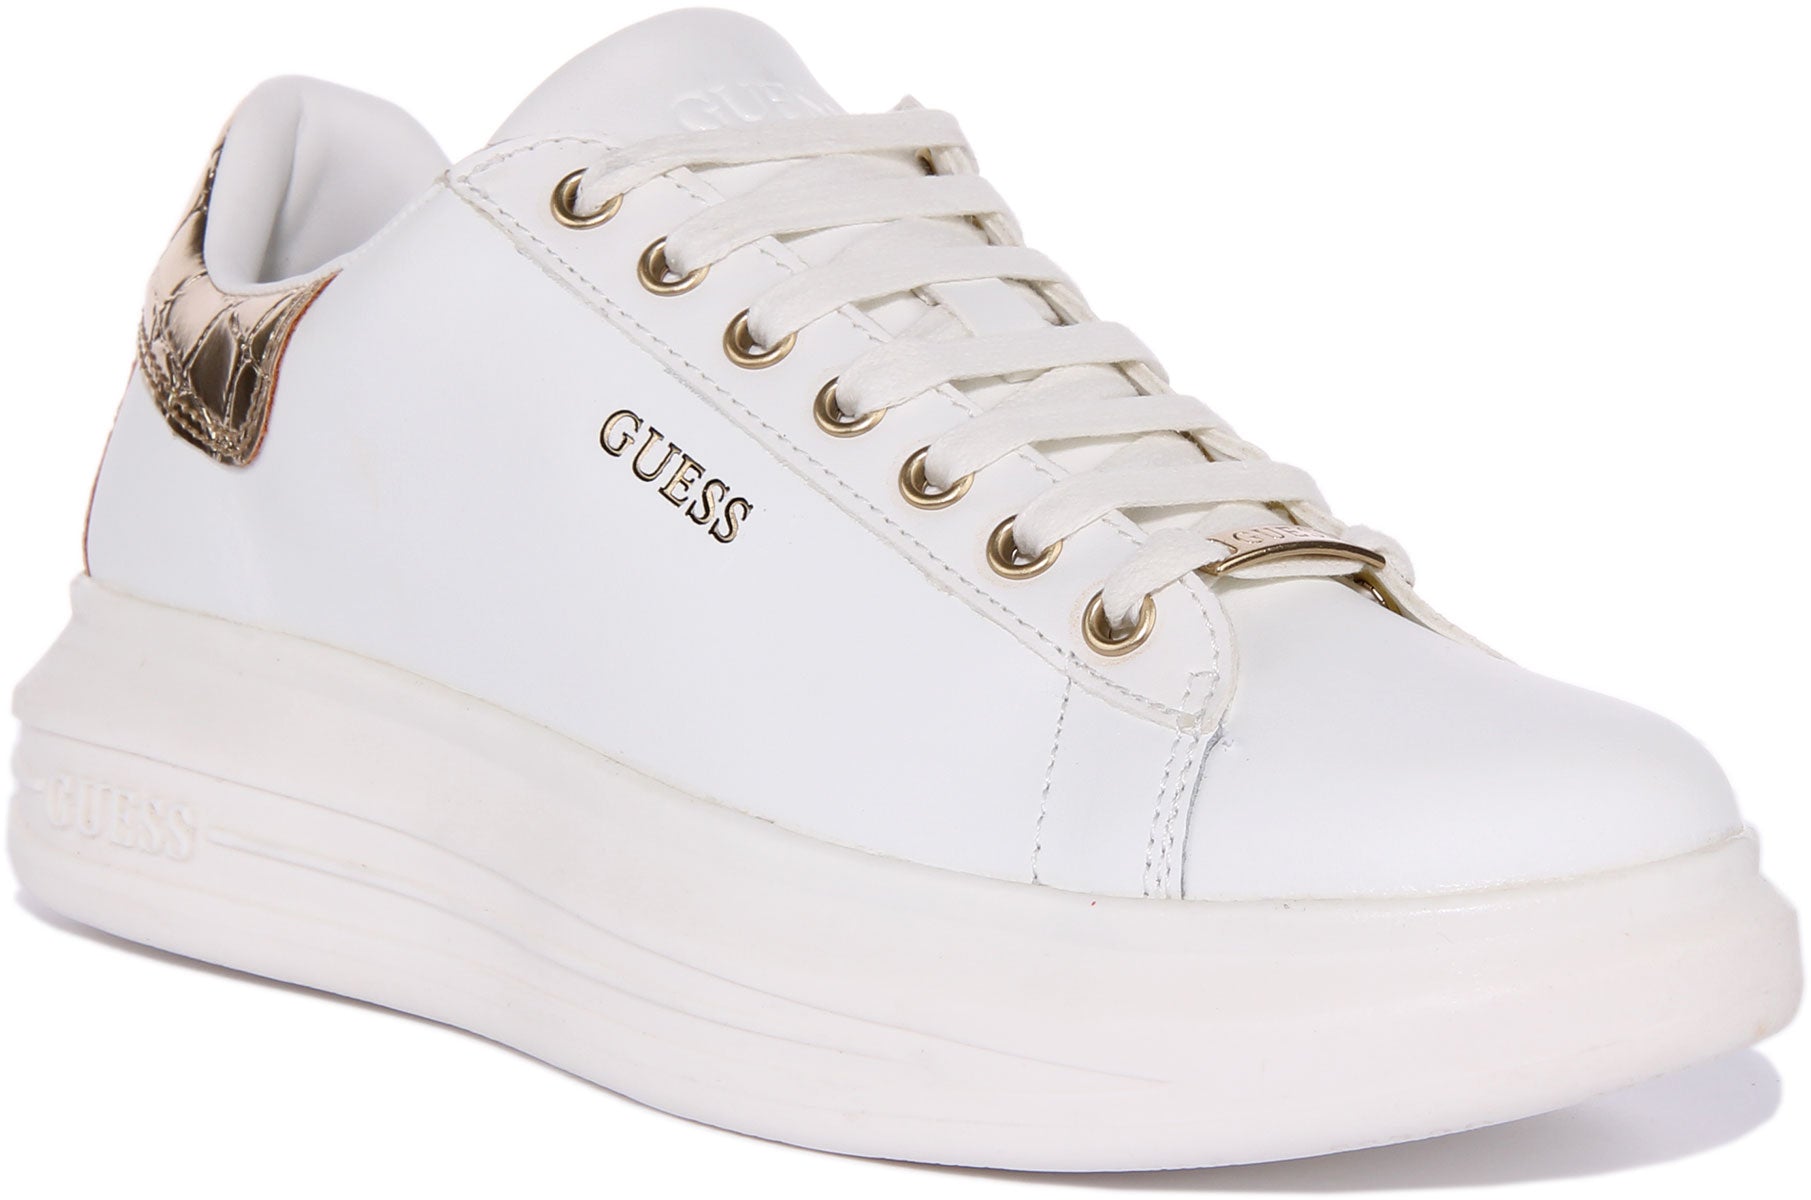 Baskets femme Guess Tokyo - Sneakers - Chaussures